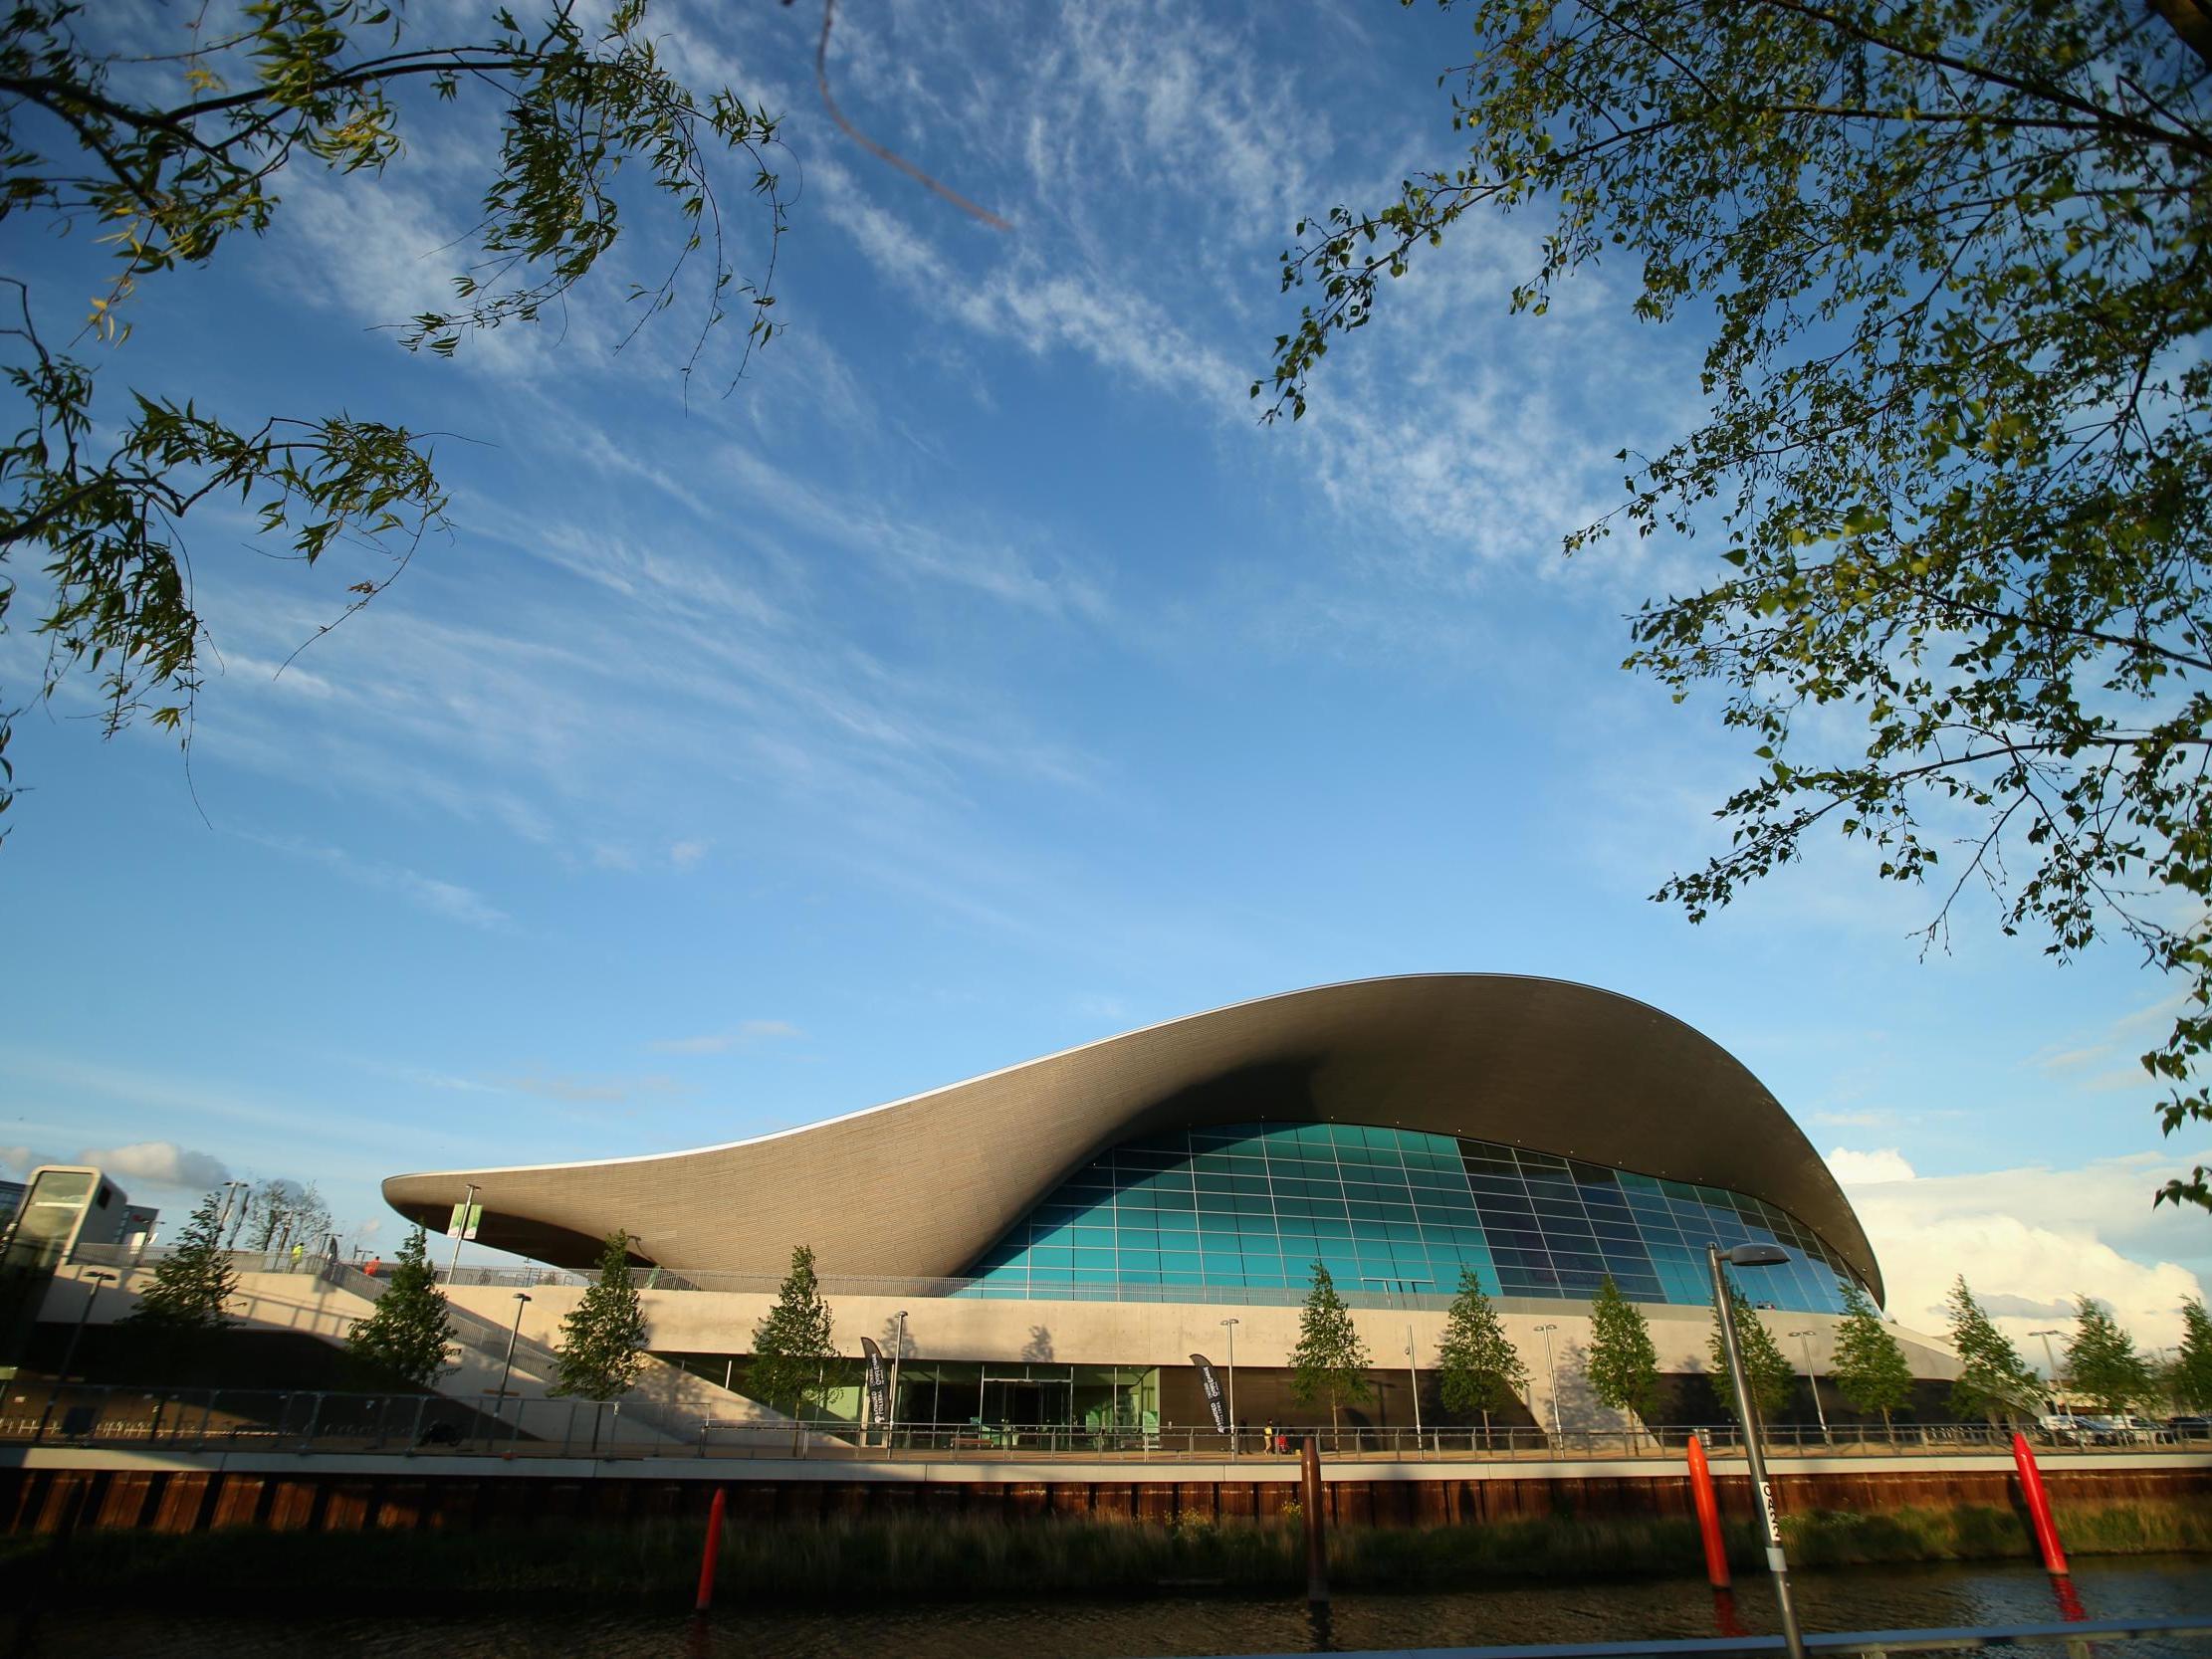 The London Aquatics Centre hosted swimming events at the 2012 Paralympic Games